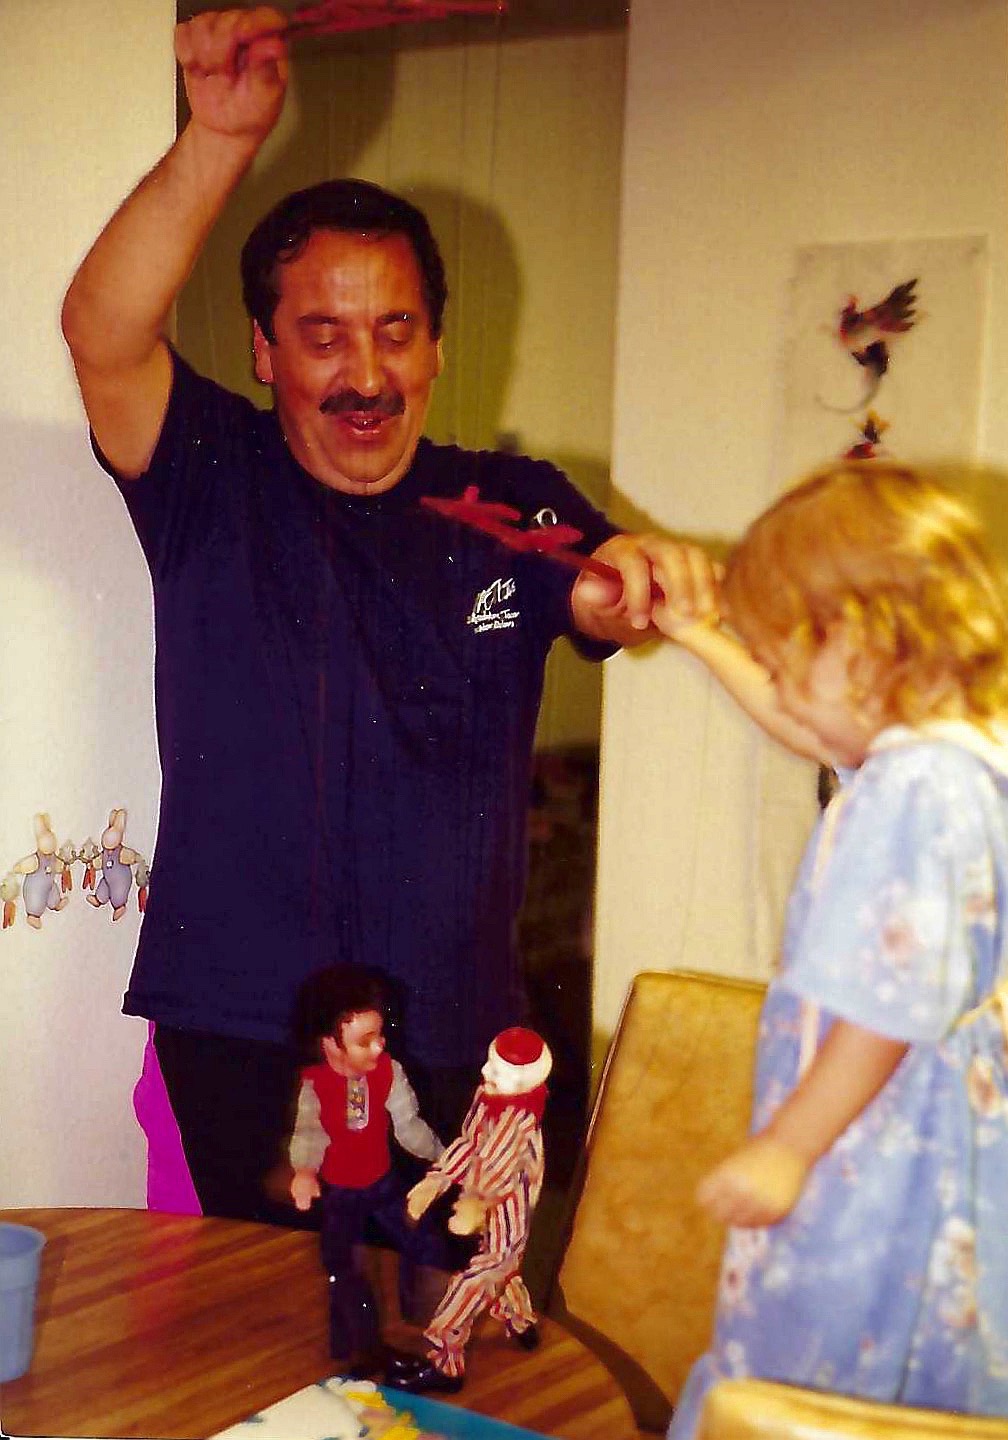 Nikki , grandpa ("Jimmy") and more puppeteering teaching her the family trade secrets with his childhood marionettes.